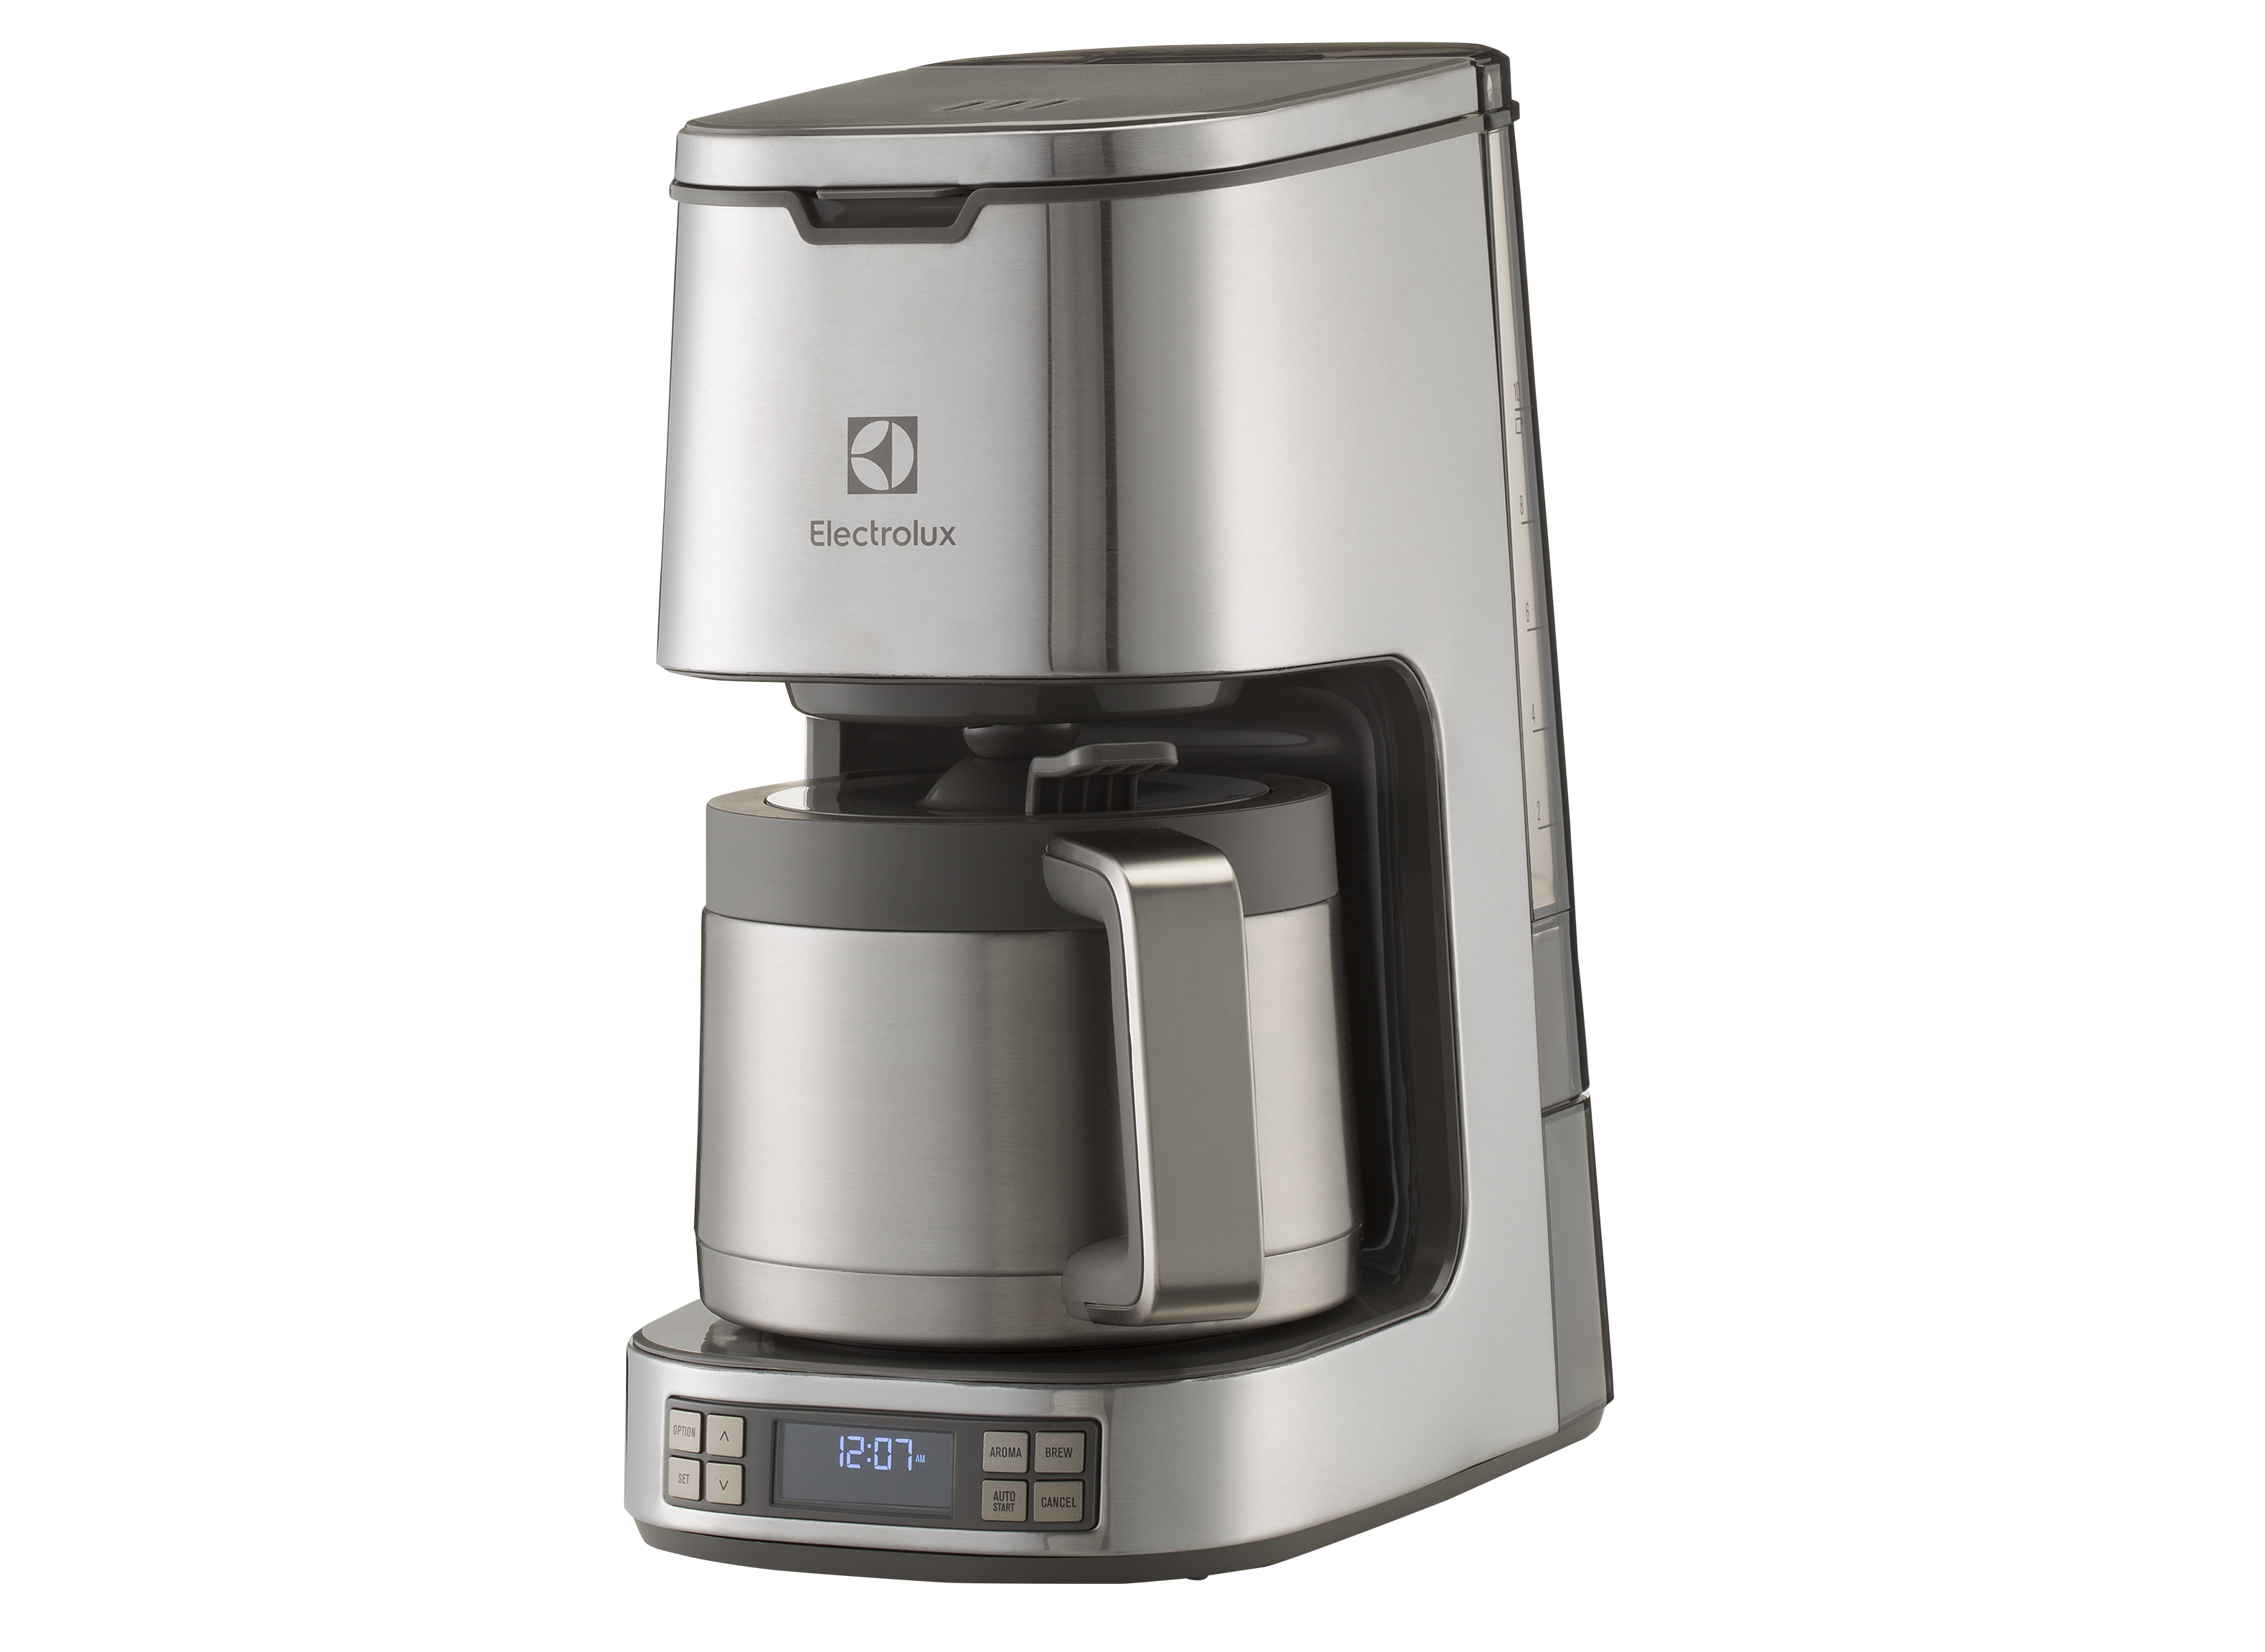 https://crdms.images.consumerreports.org/prod/products/cr/models/384687-coffeemakers-electrolux-expressionisteltc10d8ps10cup.png